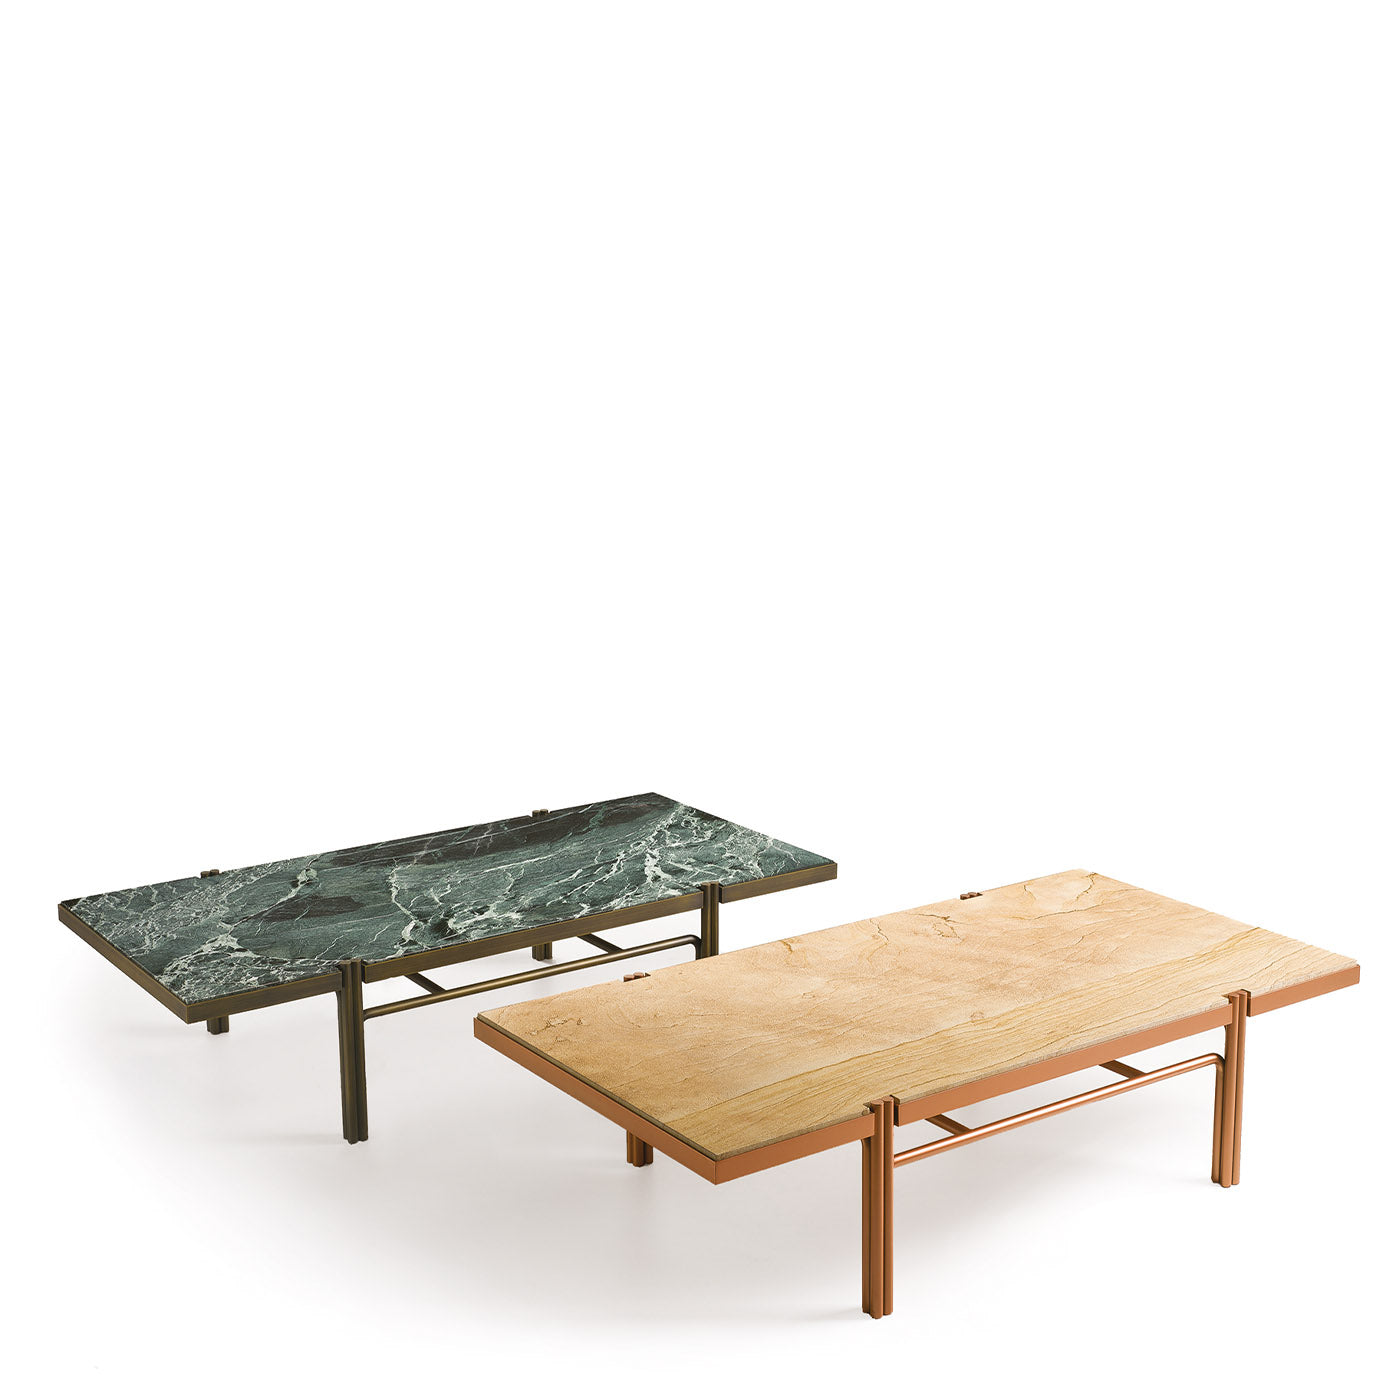 Mathilde Coffee Table in Green Marble - Alternative view 1